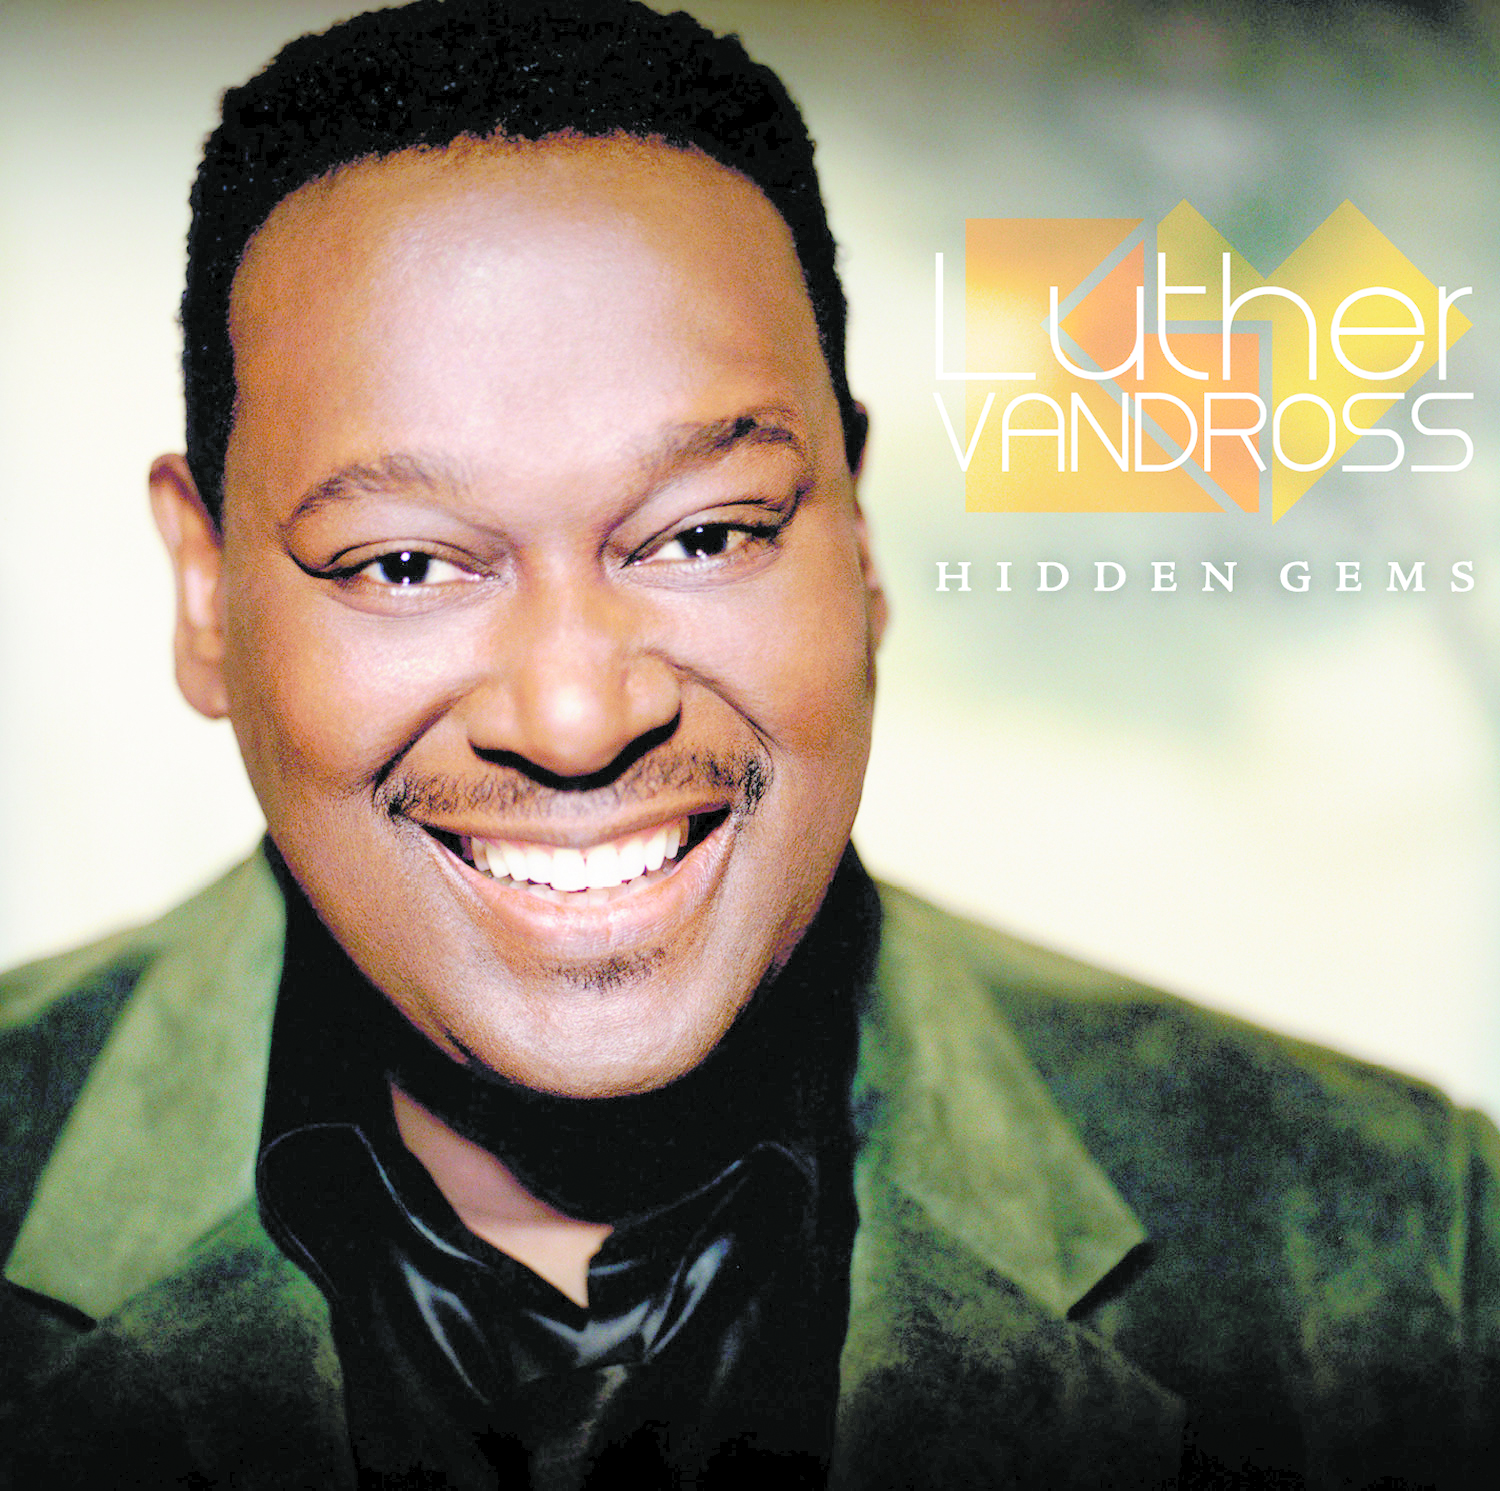 HQ Luther Vandross Wallpapers | File 2054.37Kb